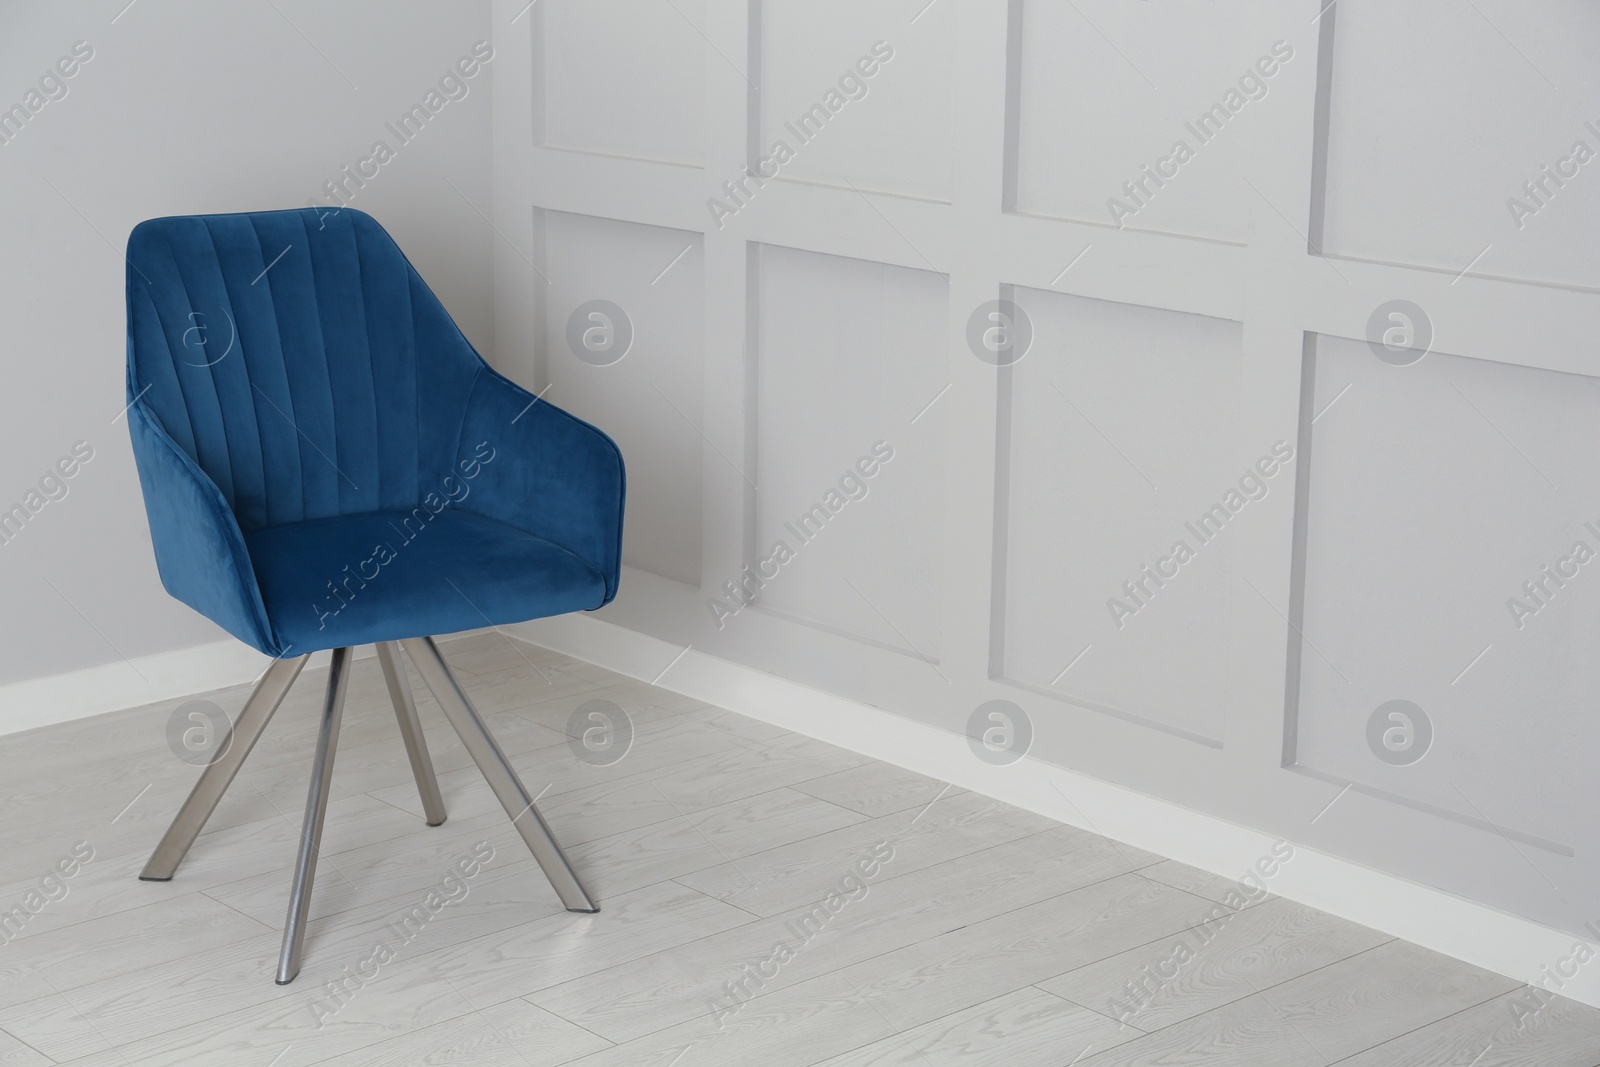 Photo of Stylish blue armchair near light wall in room. Space for text